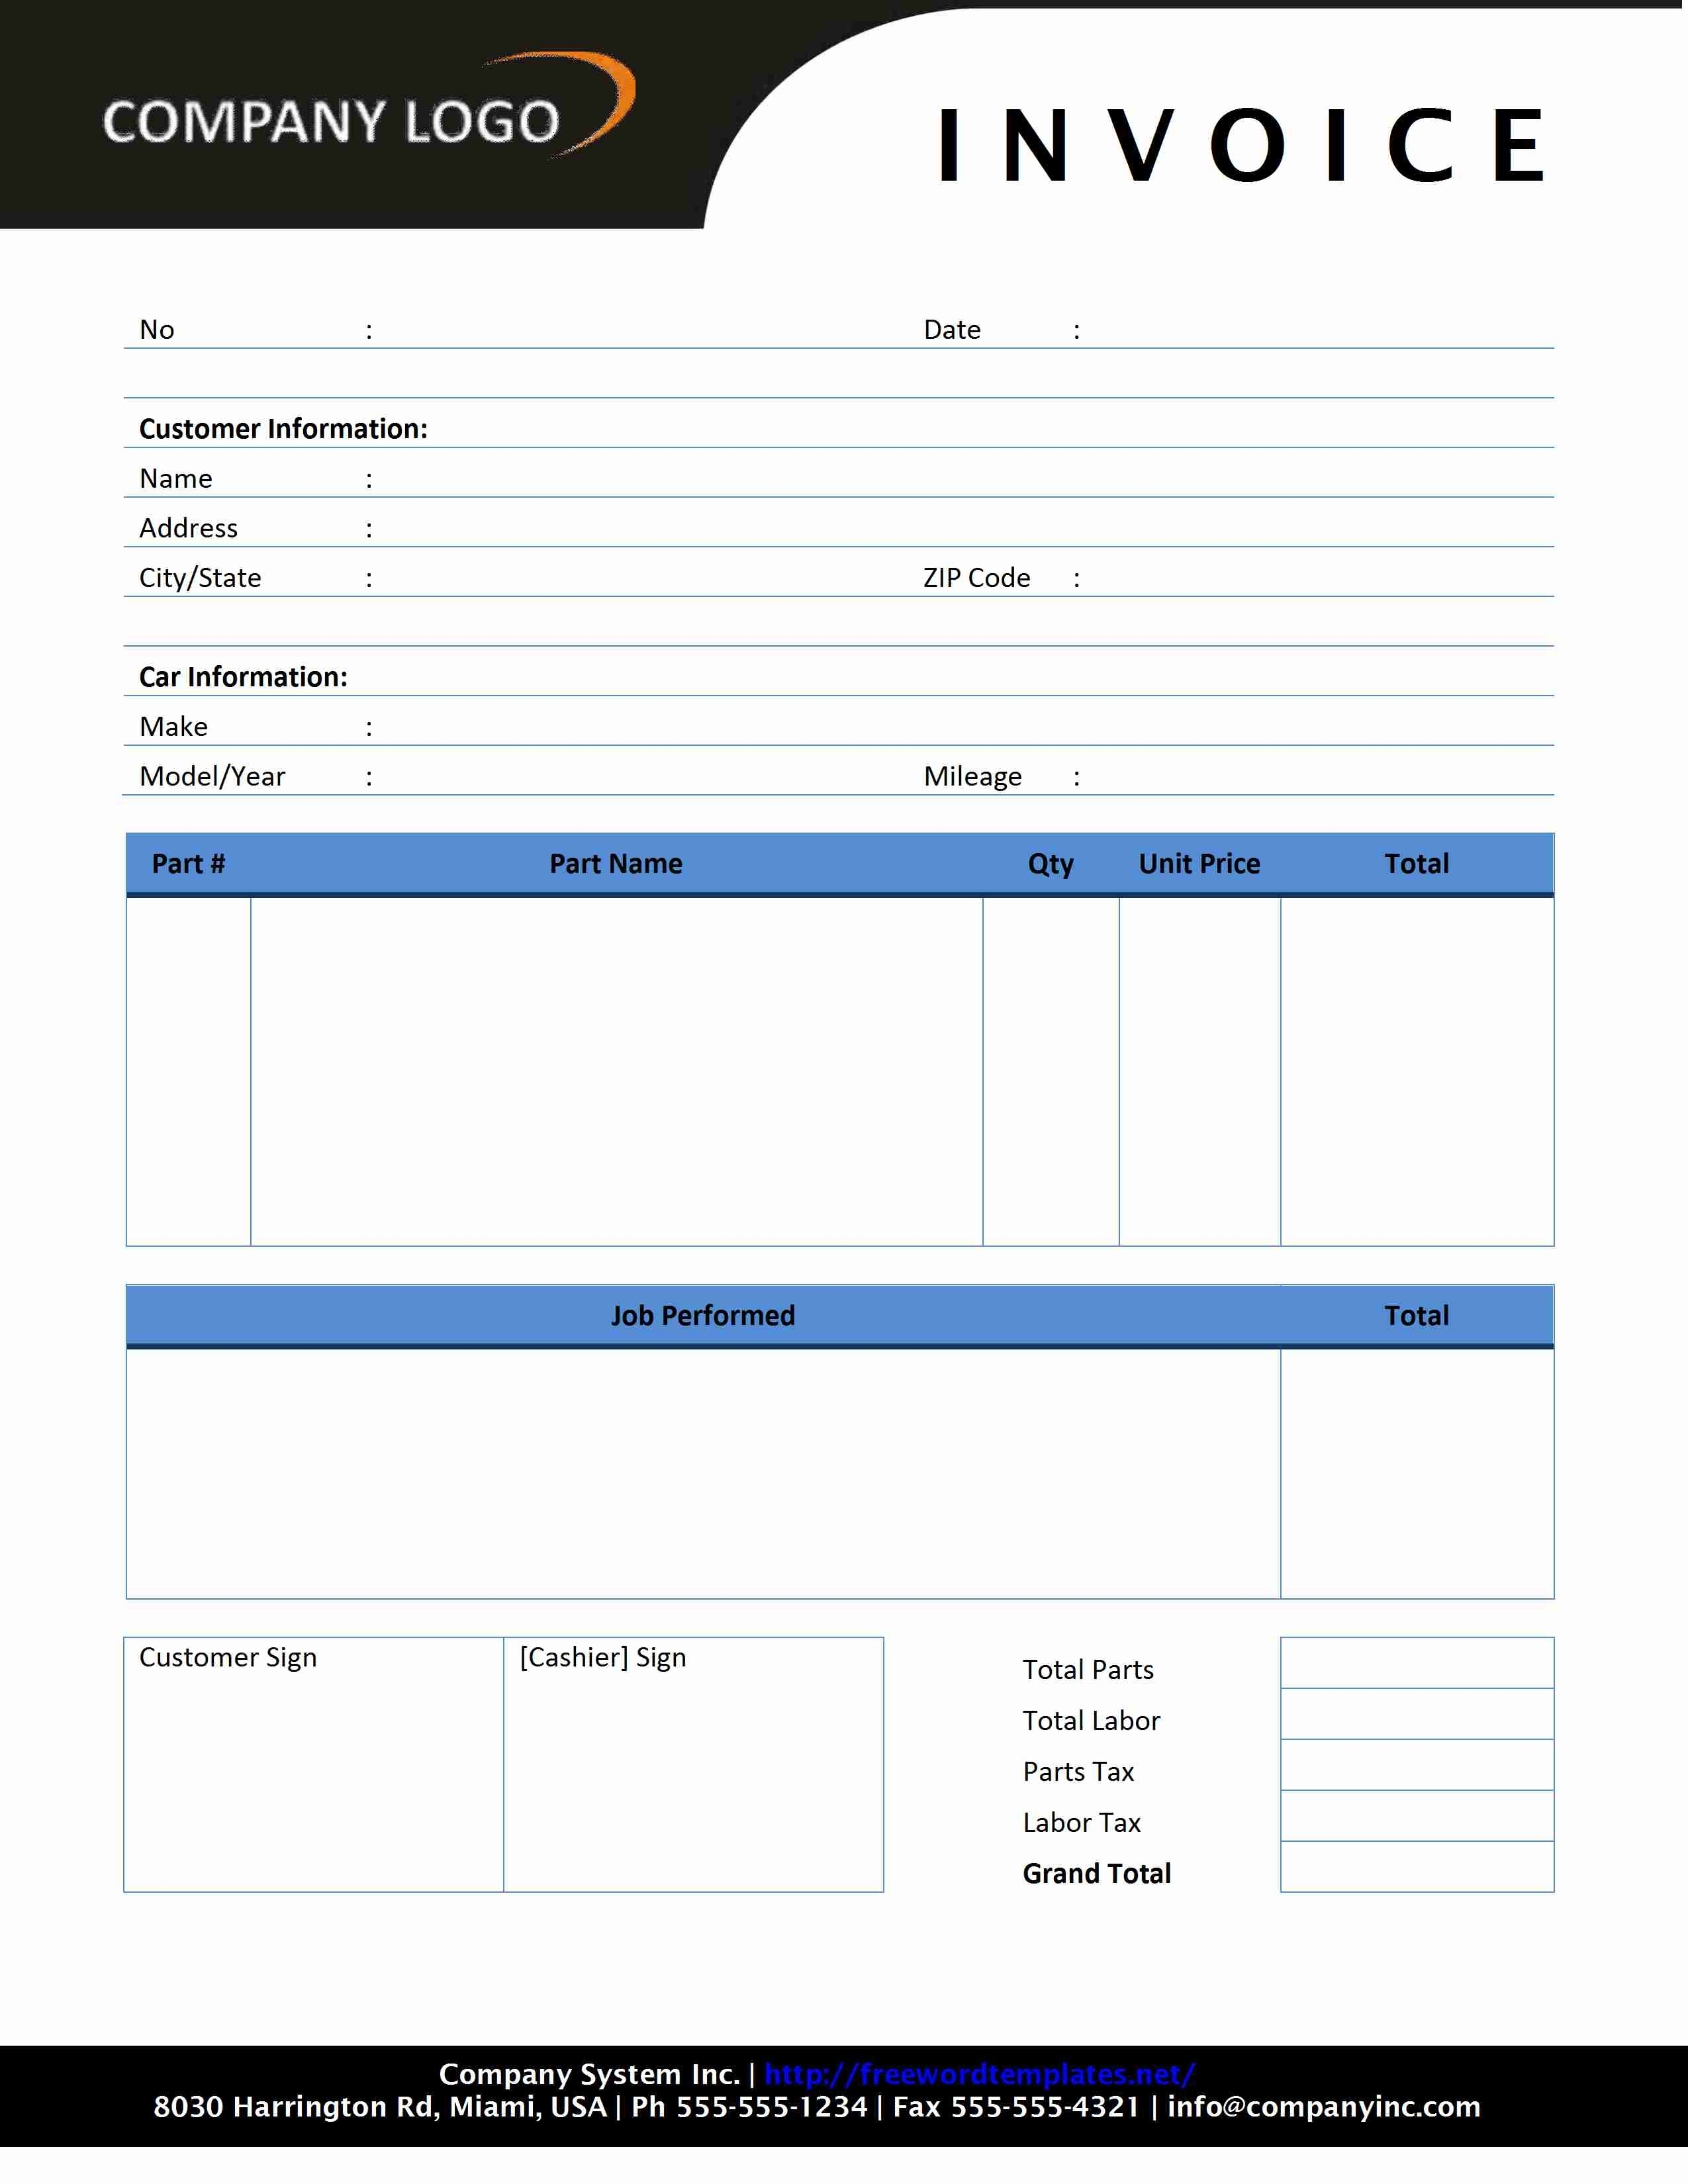 7 invoices and invoice templates template html bootstrap admin html invoice templates